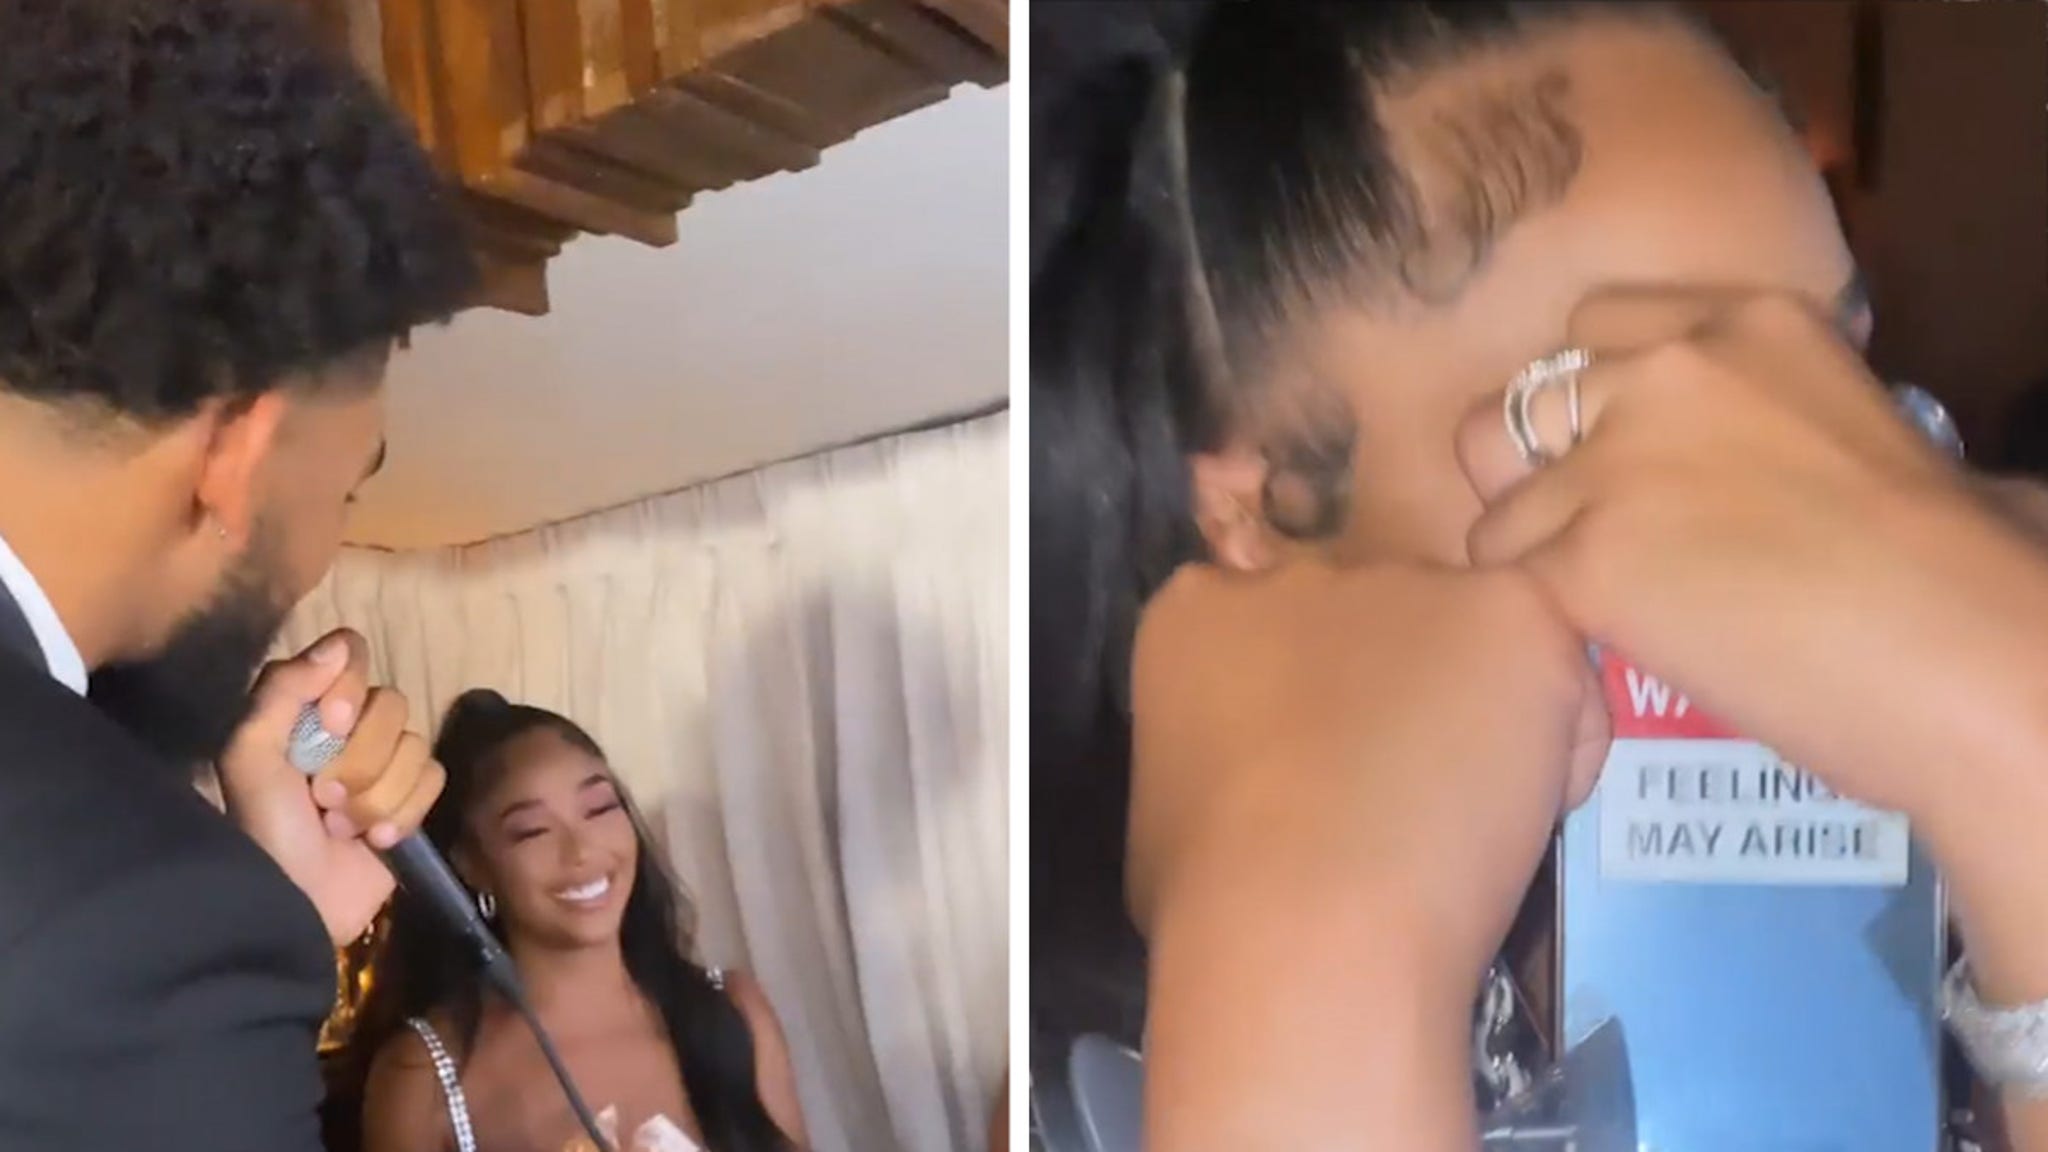 Jordyn Woods Celebrates Her 25th Birthday With A Backyard Bash +  Karl-Anthony Towns Gives Her An Iconic Gift!, News